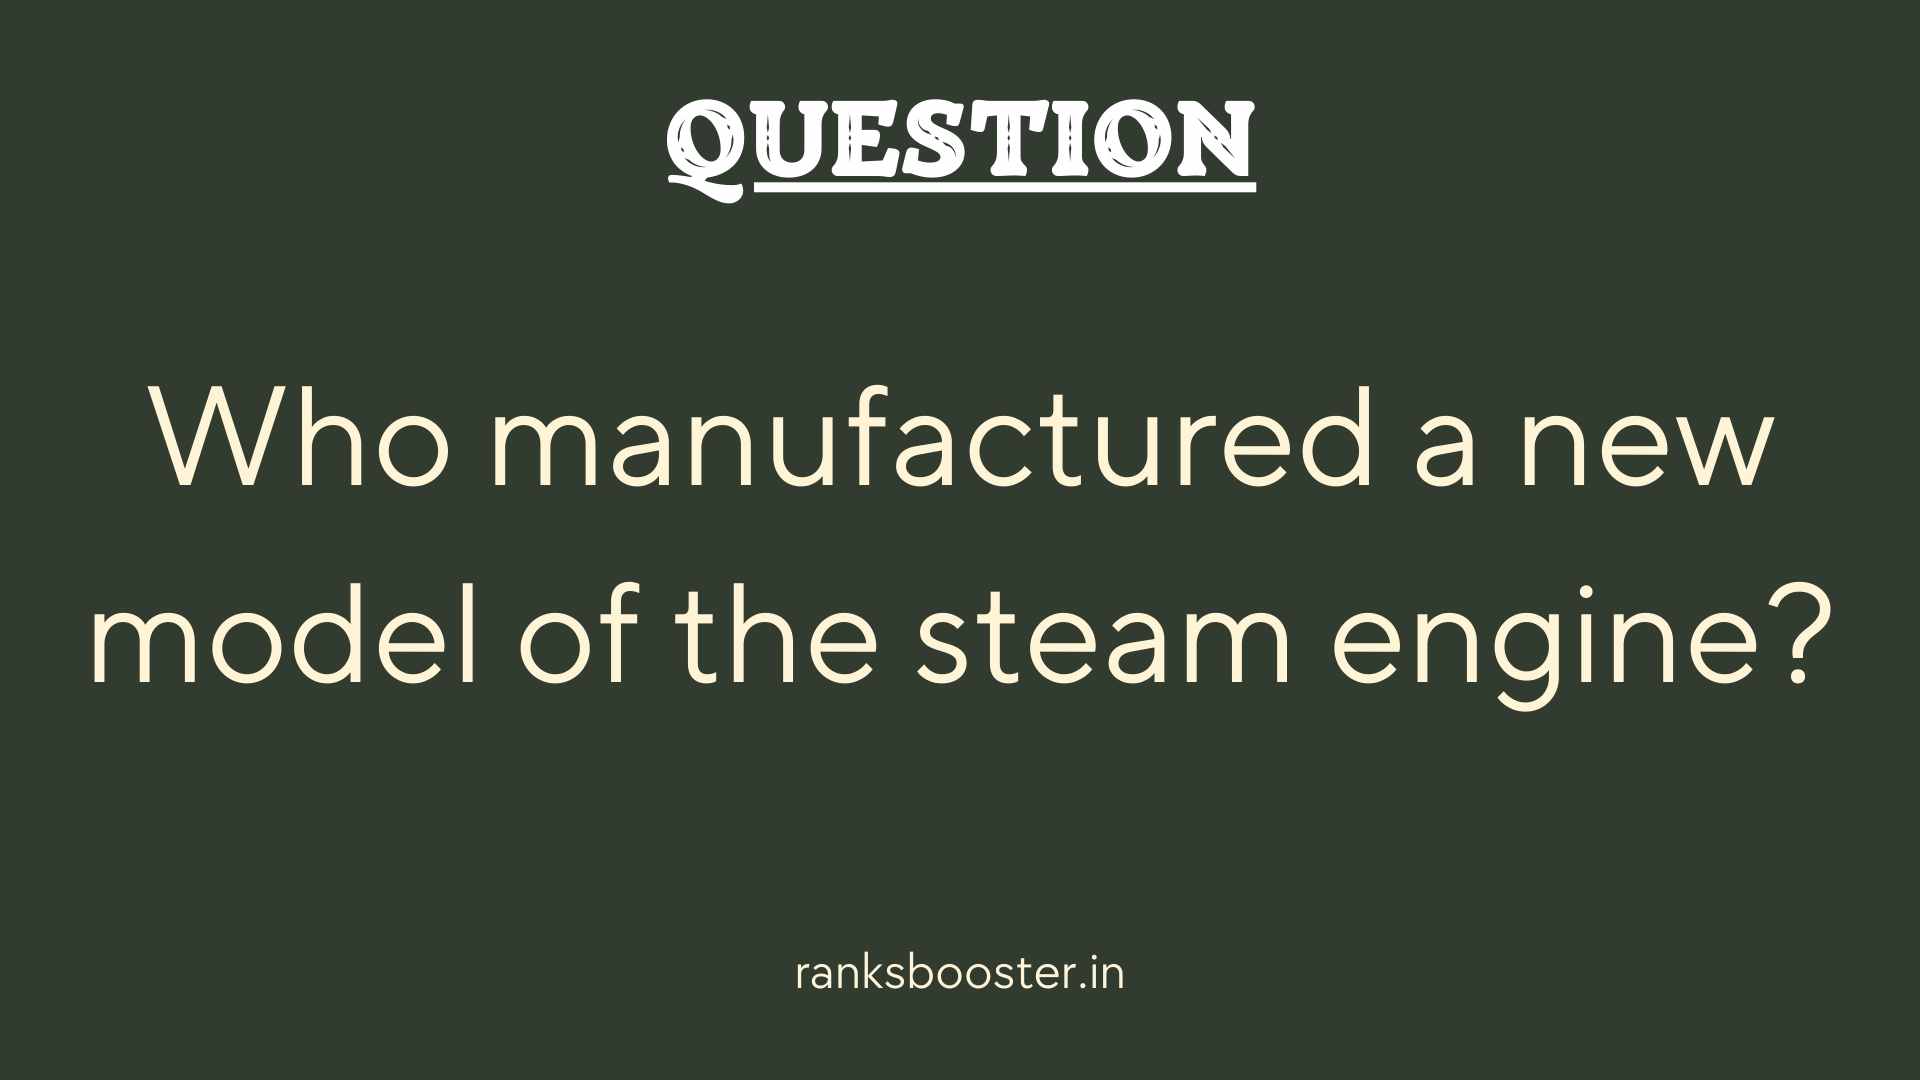 Question: Who manufactured a new model of the steam engine?